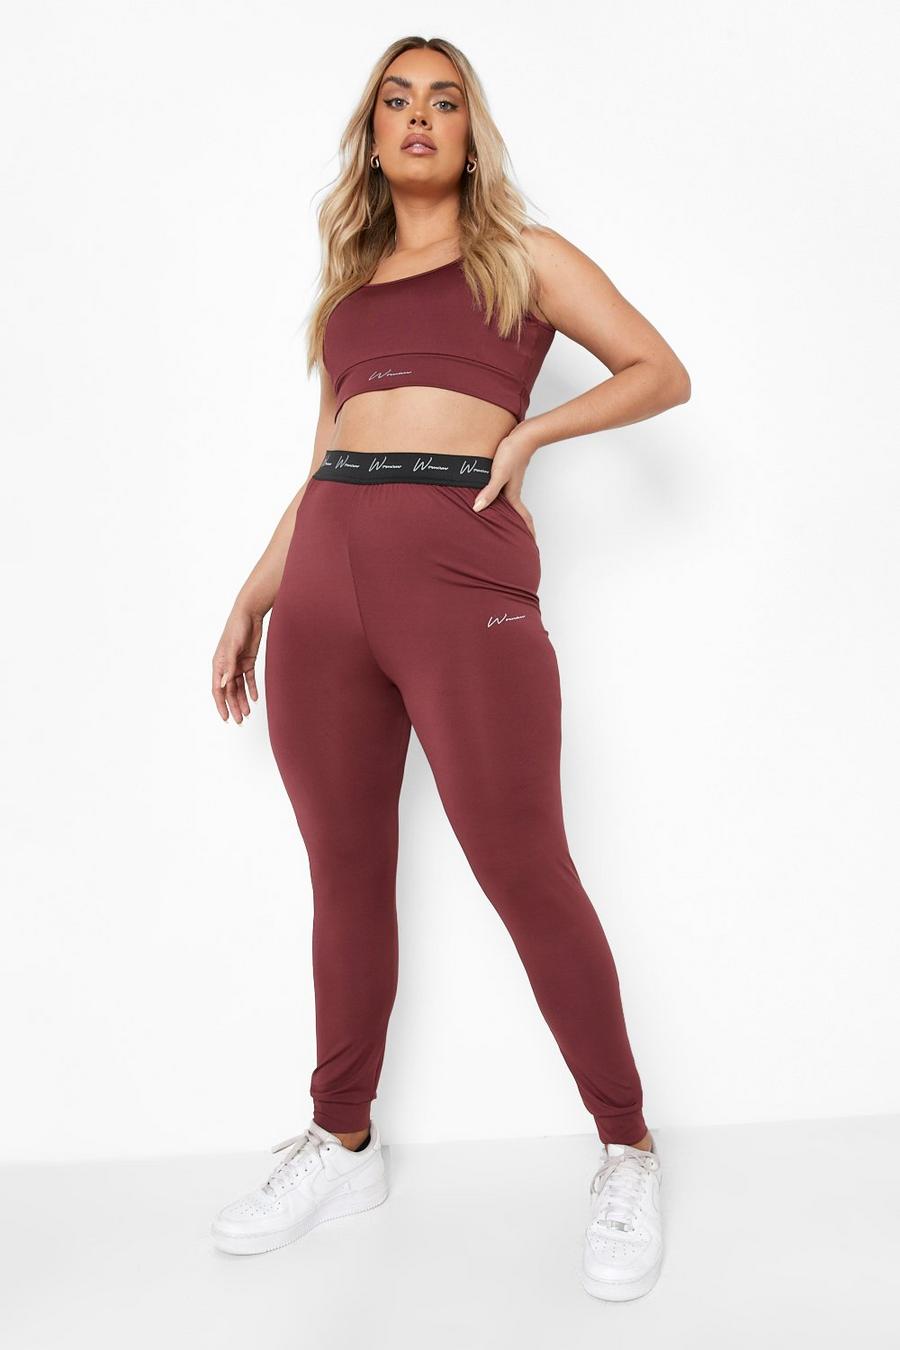 Burgundy red Plus Woman Active Compression Tights